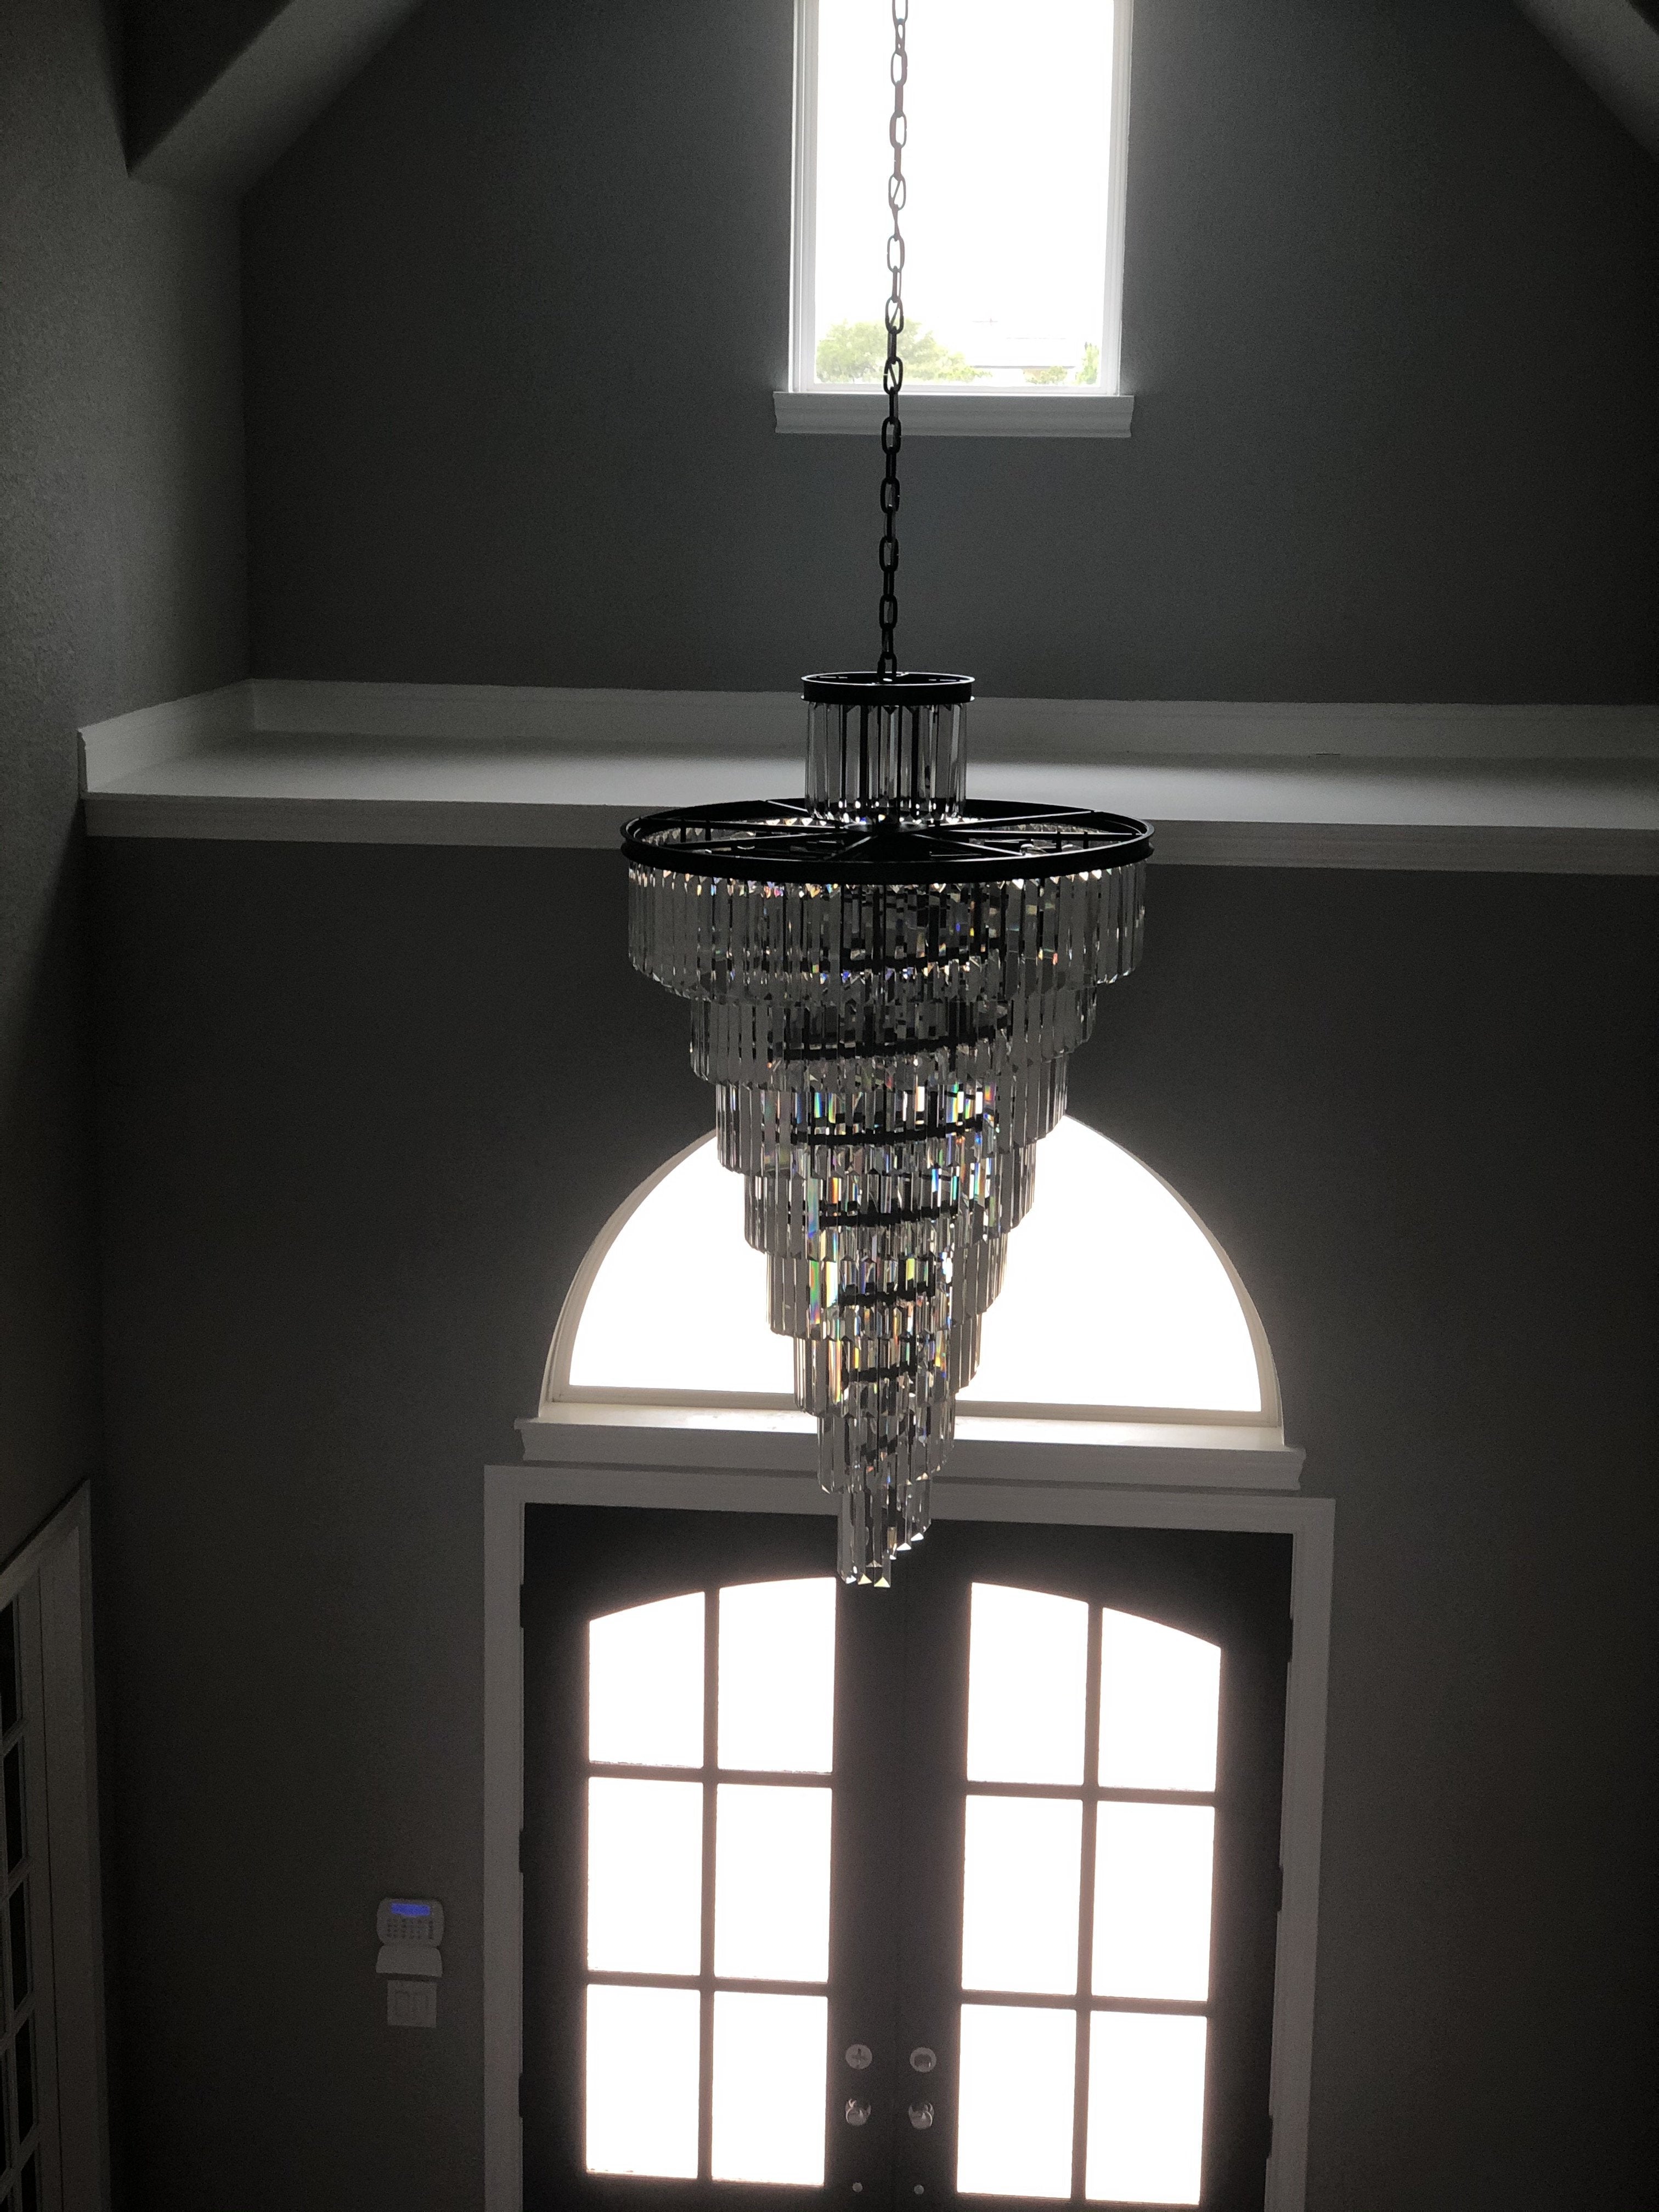 Veccini Odeon Spiral Tiered/ Layered Crystal Fringe Chandelier - Italian Concept